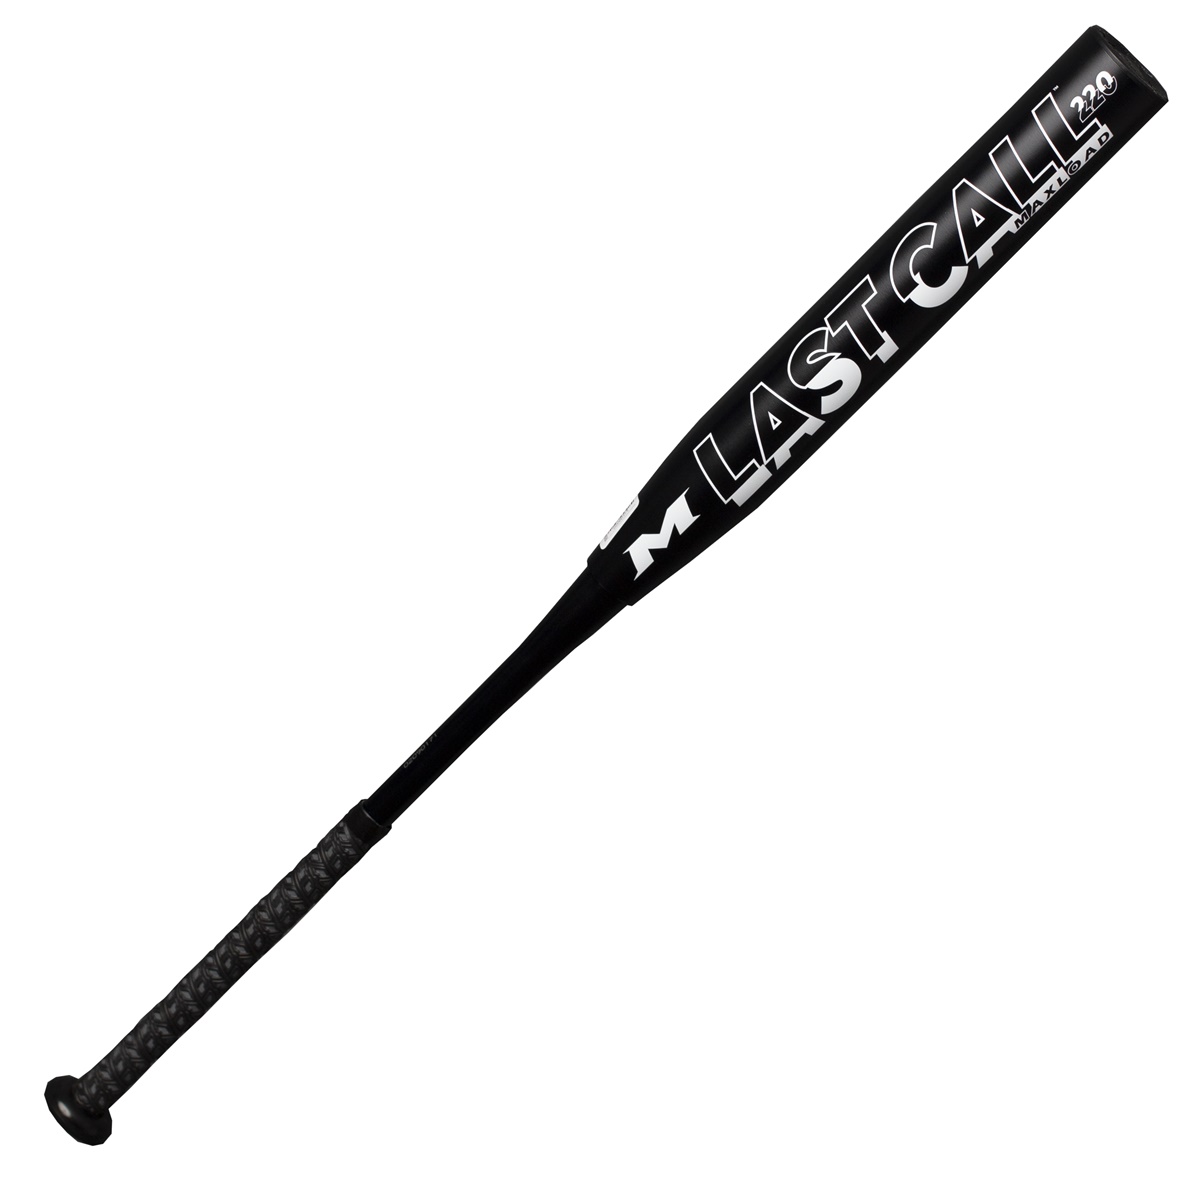 Don't miss out on the 2021 Last Call USSSA bat! USSSA will be implementing a new testing certification in 2021 meaning new bats will be certified at a different standard. These Last Call bats are the last to feature the old testing standard, and will be grandfathered in when the change is in place. These bats feature our Triple Matrix Core+ technology combined with 100 comp premium aerospace grade fiber which work together to maximize performance and durability. In addition, the F2P handle optimizes barrel flex which allows you to get the 12-inch, Maxload barrel through the zone faster. Don't miss out on these crazy hot bats, get your Last Call USSSA bat today! Made in the U.S.A.  Size:   2 1/4 in  Frame:   Two-Piece  Technology:   Triple Matrix Core, 100 COMP  Series:   Last Call  Warranty:   1 Year  Barrel Length:   12 in  Year Released:   2021  TRIPLE MATRIX CORE + TECHNOLOGY INCREASES OUR EXCLUSIVE AEROSPACE GRADE MATERIAL VOLUME BY 15%, ELIMINATING WALL SEAMS WITH A BREAKTHROUGH CARBONIZED PROCESS THAT MAXIMIZES BOTH PERFORMANCE AND DURABILITY. FLEX 2 POWER (F2P) OPTIMIZES HANDLE FLEX TO BARREL LOADING WHICH MAXIMIZES THE OVERALL SPEED OF THE BAT HEAD THROUGH THE HITTING ZONE. 100 COMP™IS THE REVOLUTIONARY FORMULA THAT CHANGED THE GAME AND INTRODUCED CERTIFIED MIKEN® HIGH PERFORMANCE EQUIPMENT. THIS PRODUCT IS ENGINEERED UTILIZING 100% PREMIUM AEROSPACE GRADE FIBER TO DELIVER MIKEN'S LEGENDARY PERFORMANCE AND DURABILITY.